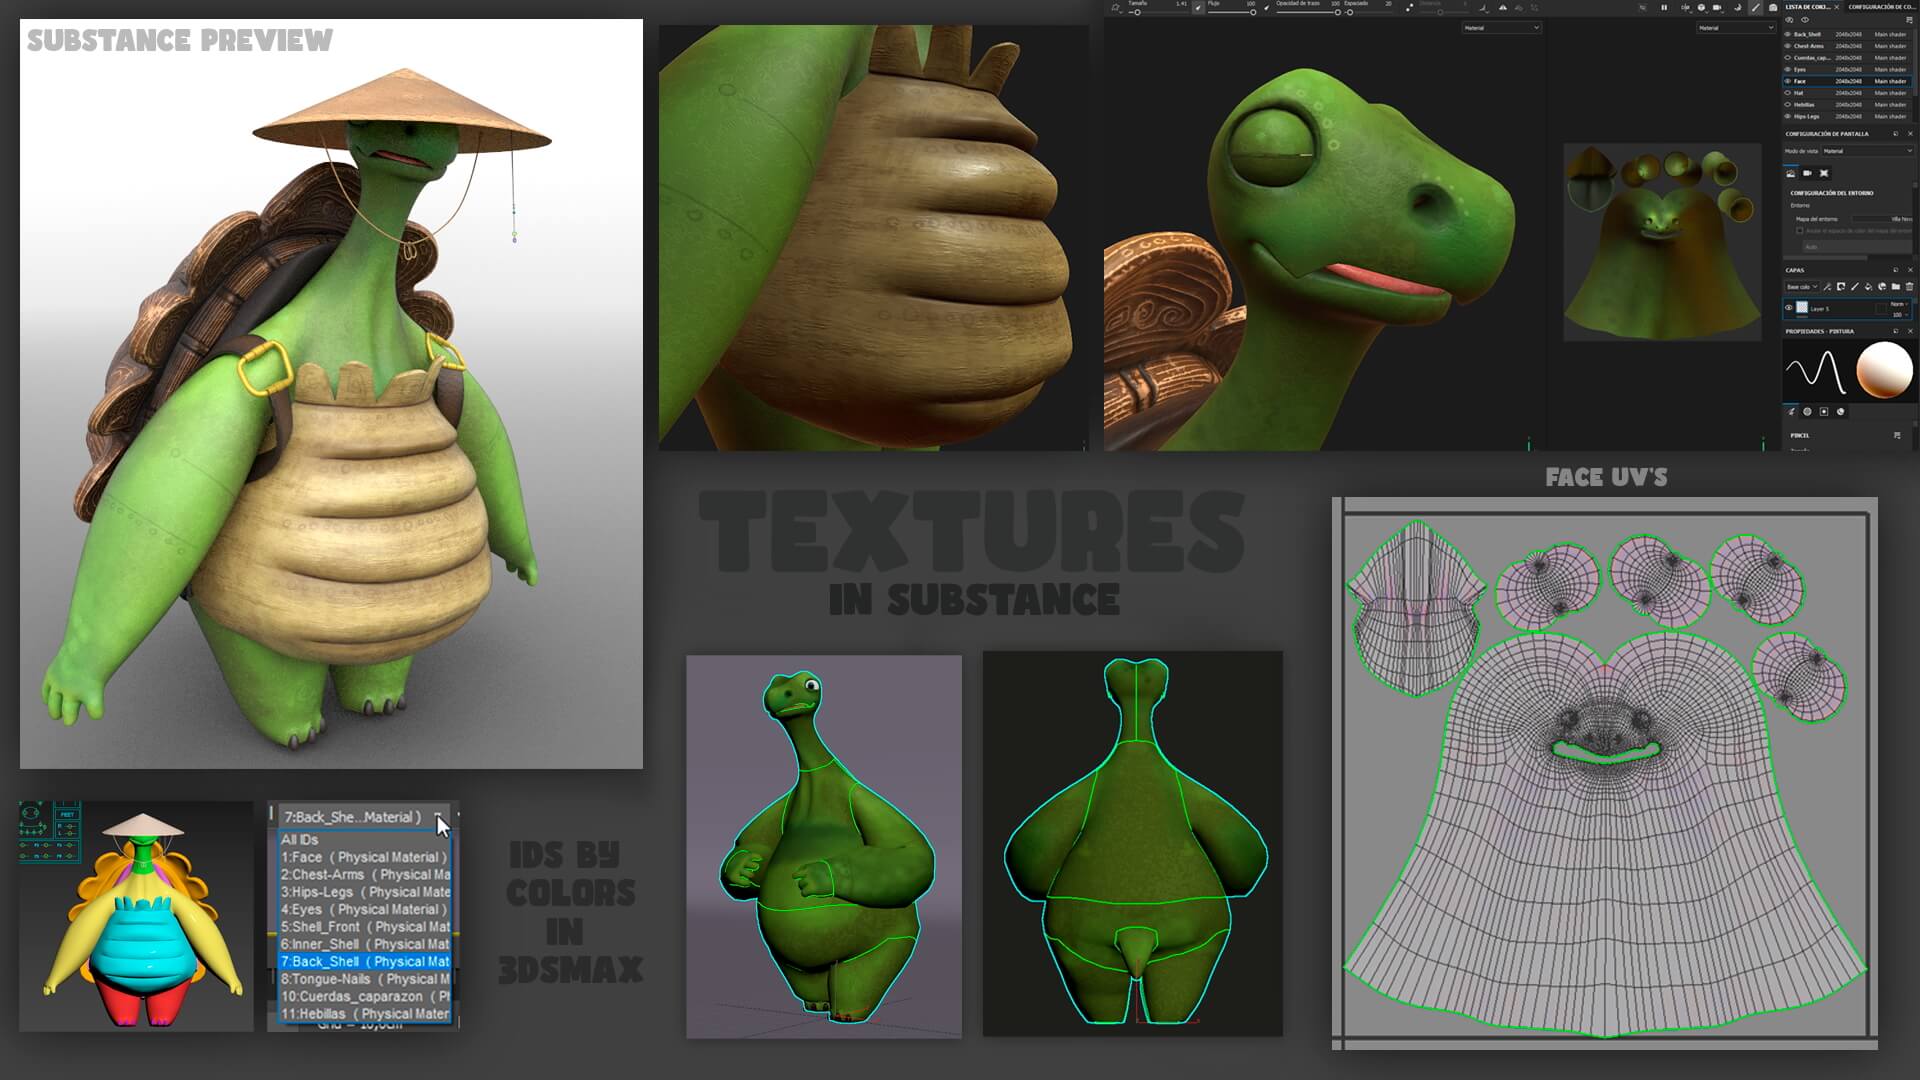 A detailed 3D model of a turtle-like character with a conical hat, shown in different textures and wireframes.